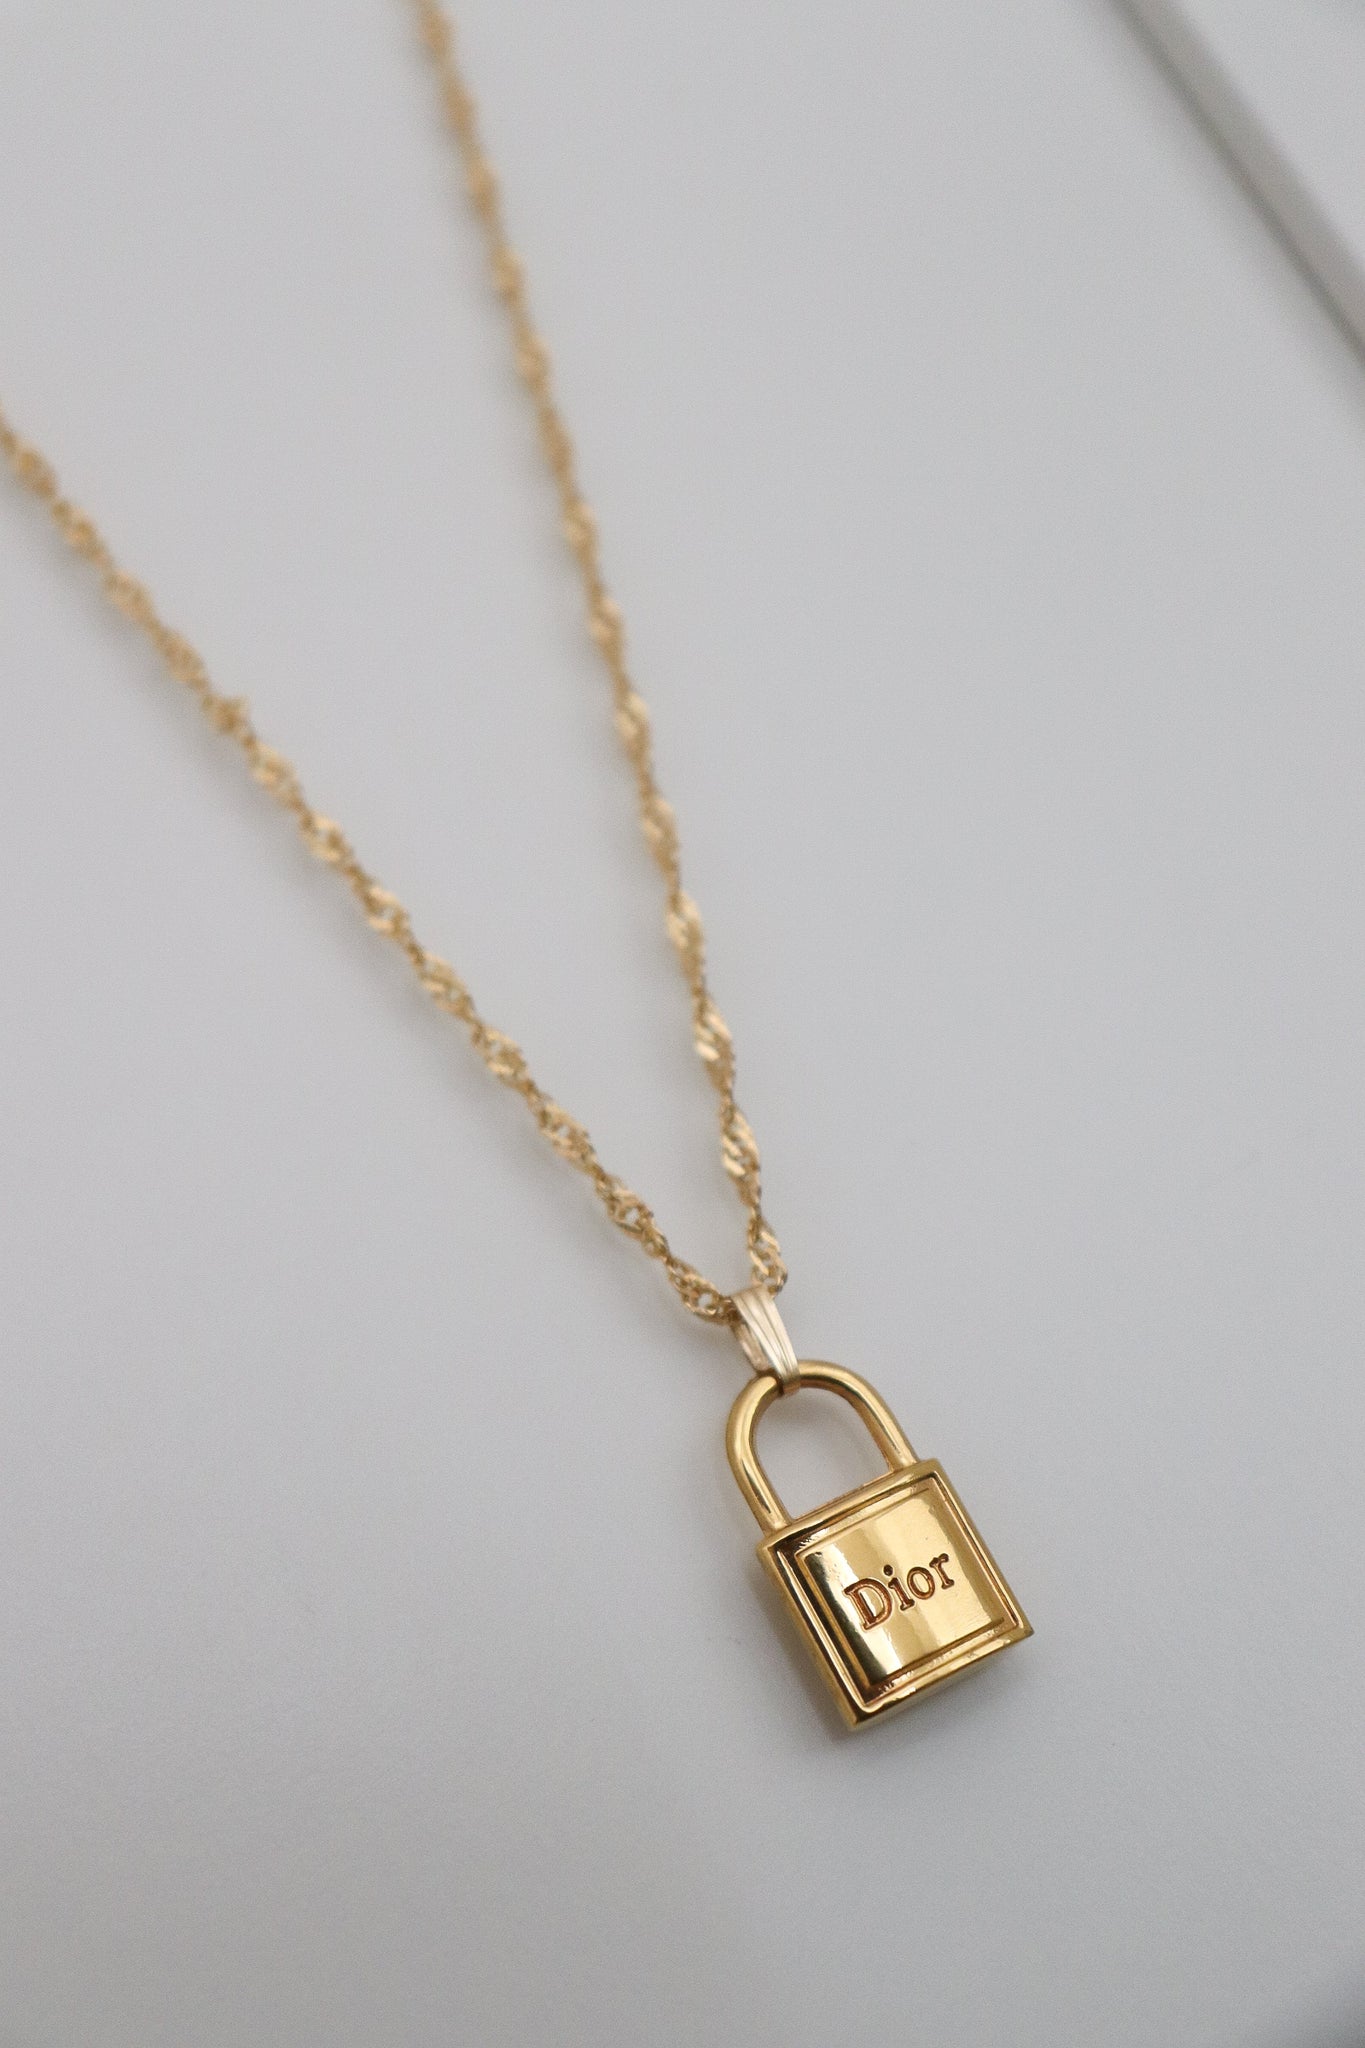 Authentic Dior lady lock necklace Sold out hard to  Depop